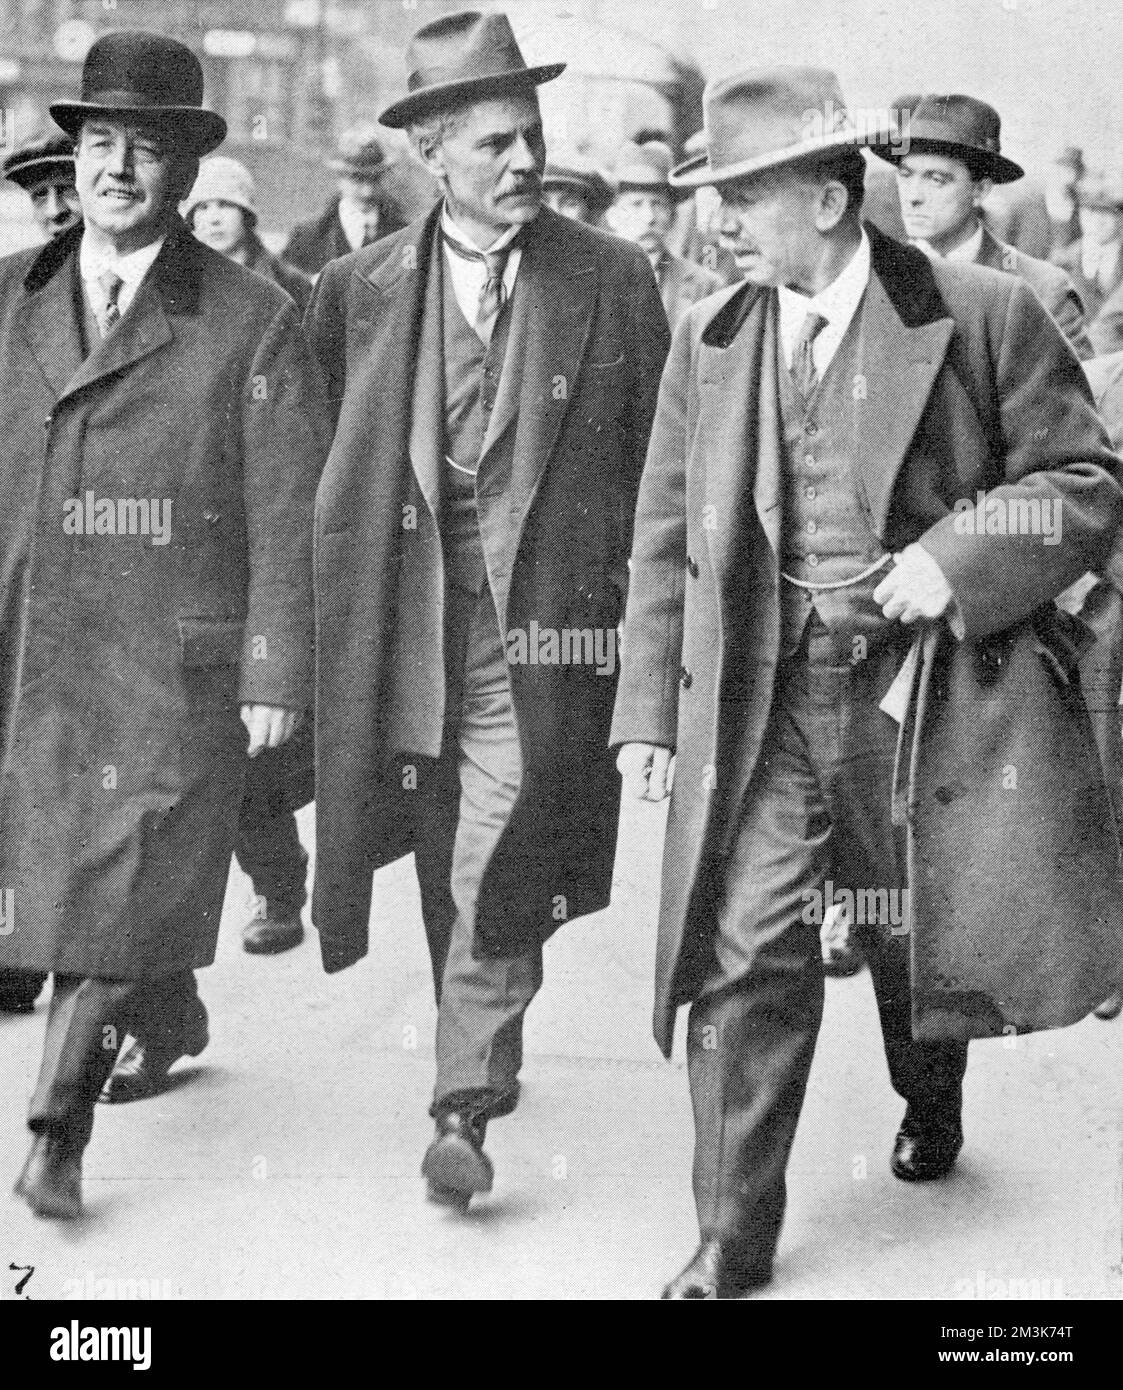 Labour leaders during the General Strike: (left to right), Arthur Henderson, Ramsay MacDonald (leader of the opposition) and Mr J. H. Thomas.   In support of a strike by coal miners over the issue of threatened wage cuts, the Trades Union Congress called a General Strike in early May 1926. The strike only involved certain key industrial sectors (docks, electricity, gas, railways) but, in the face of well-organised government emergency measures and lack of real public support, it collapsed after nine days.  1926 Stock Photo